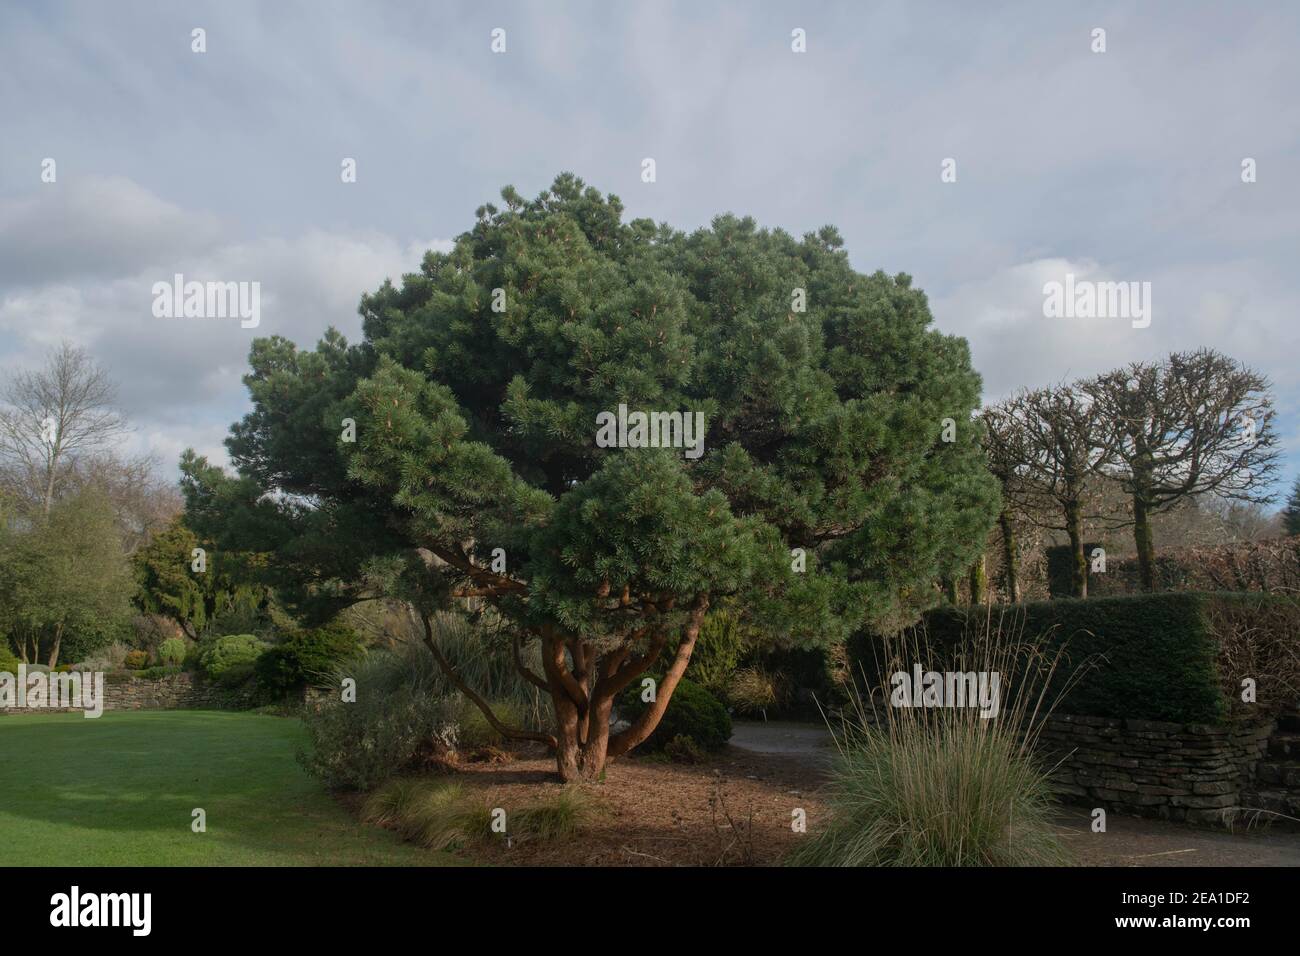 Lush Green Winter Foliage of an Evergreen Conifer Dwarf Scots Pine Tree (Pinus sylvestris 'Chantry Blue') Growing in a Country Cottage Garden in Devon Stock Photo